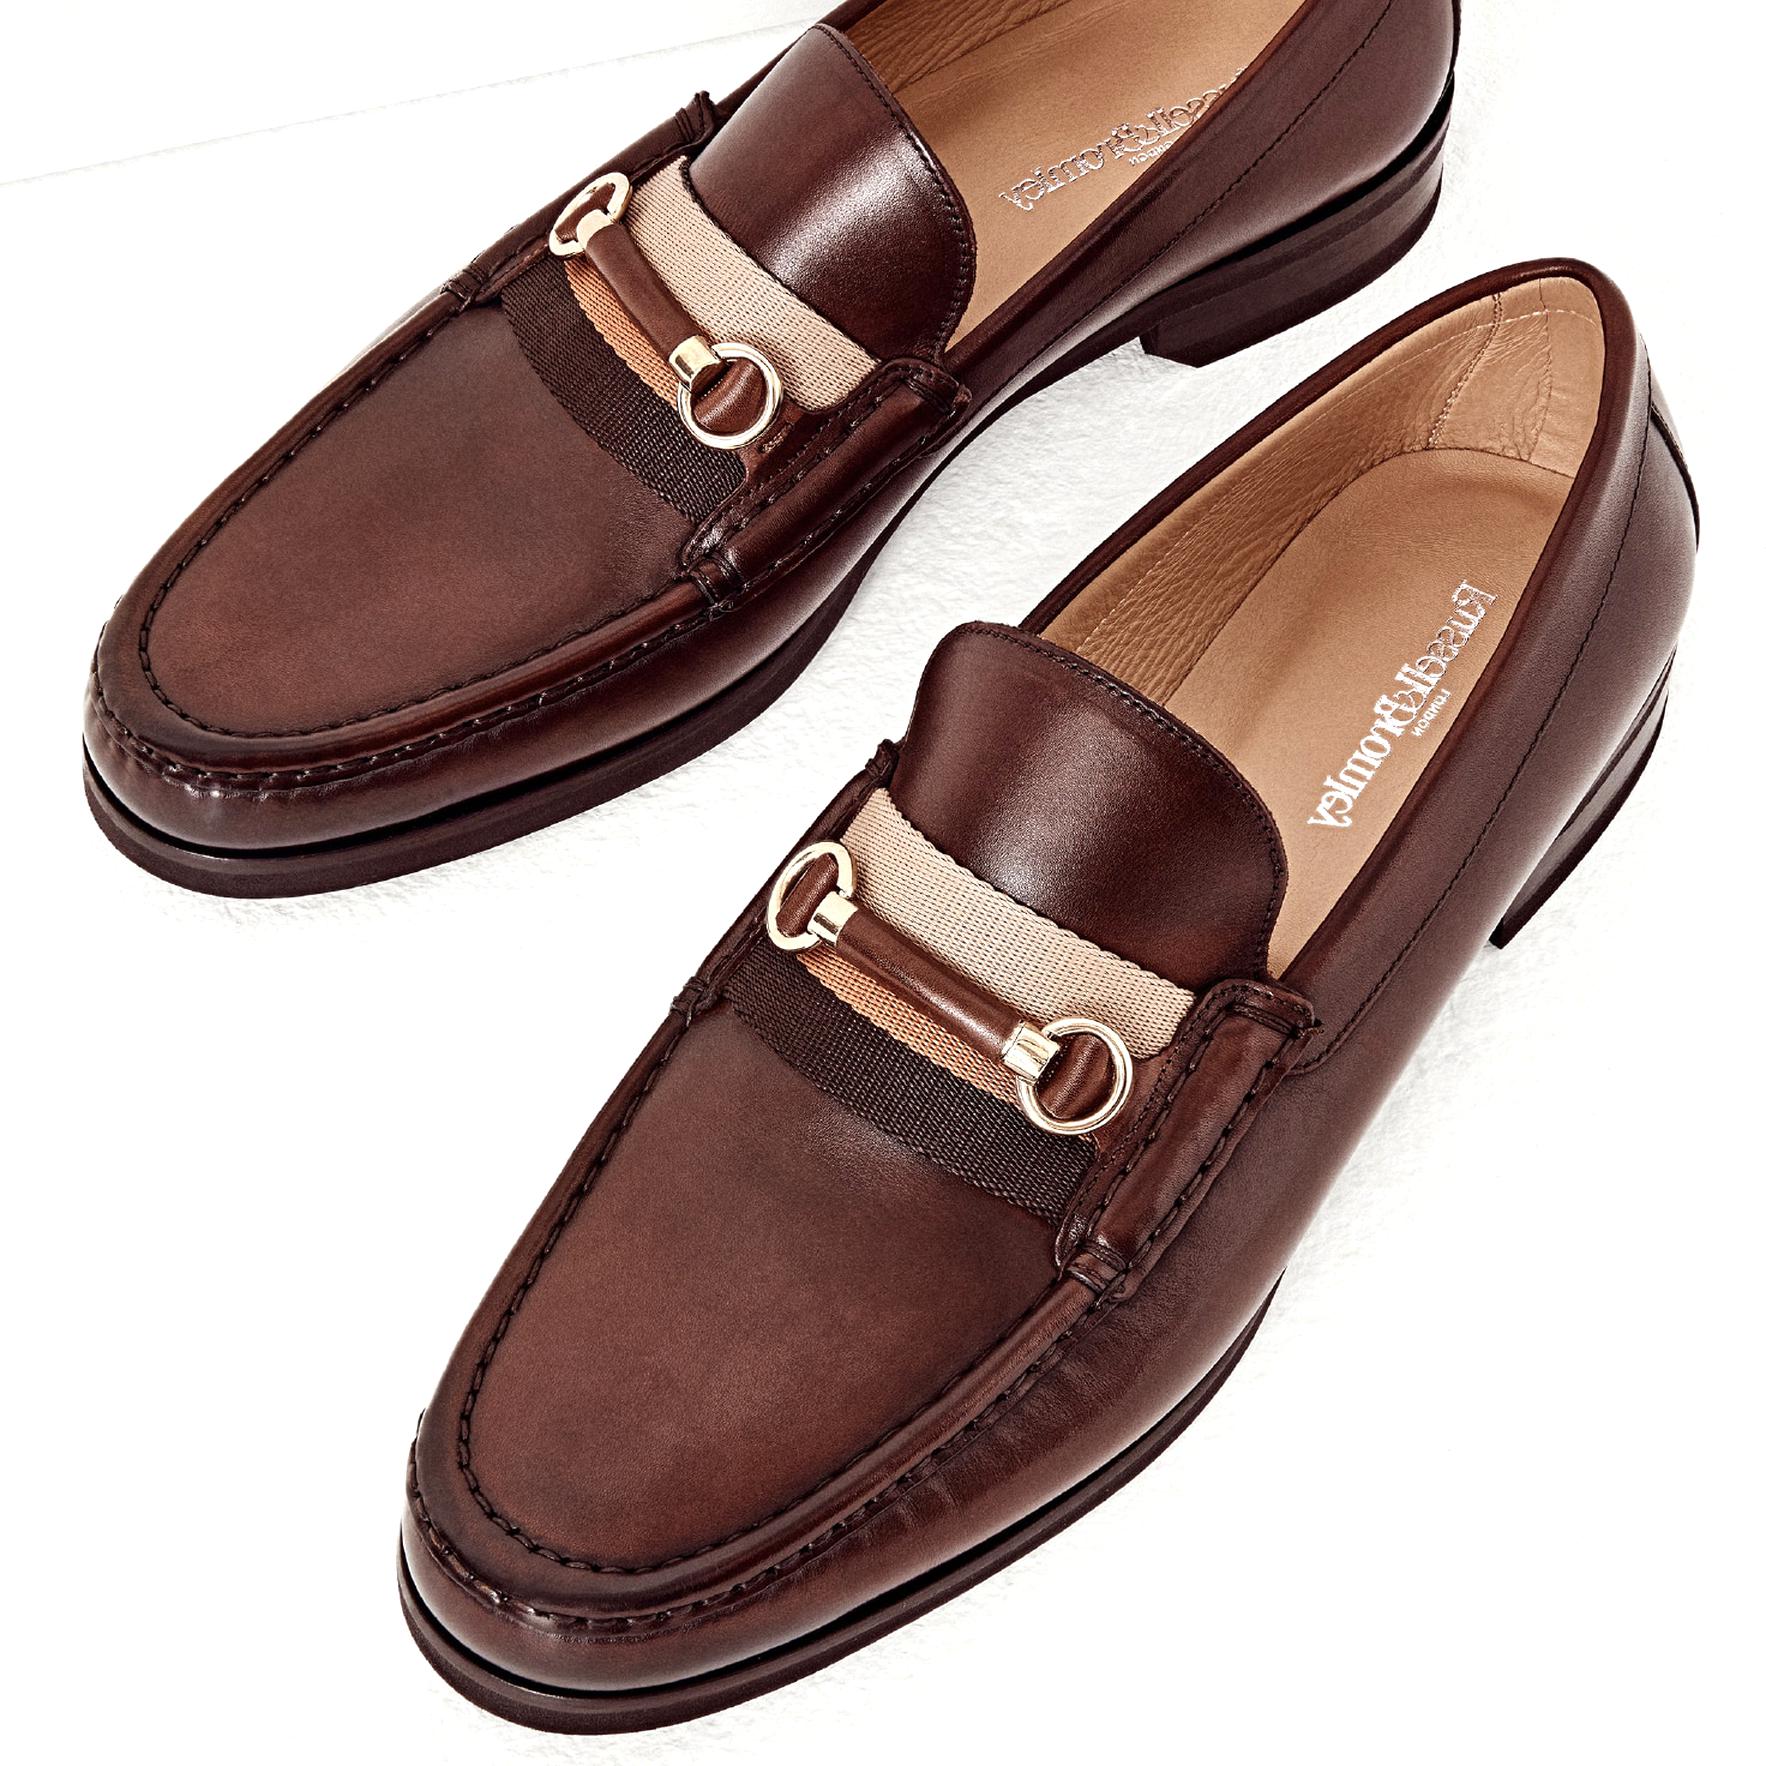 russell and bromley mens brogues